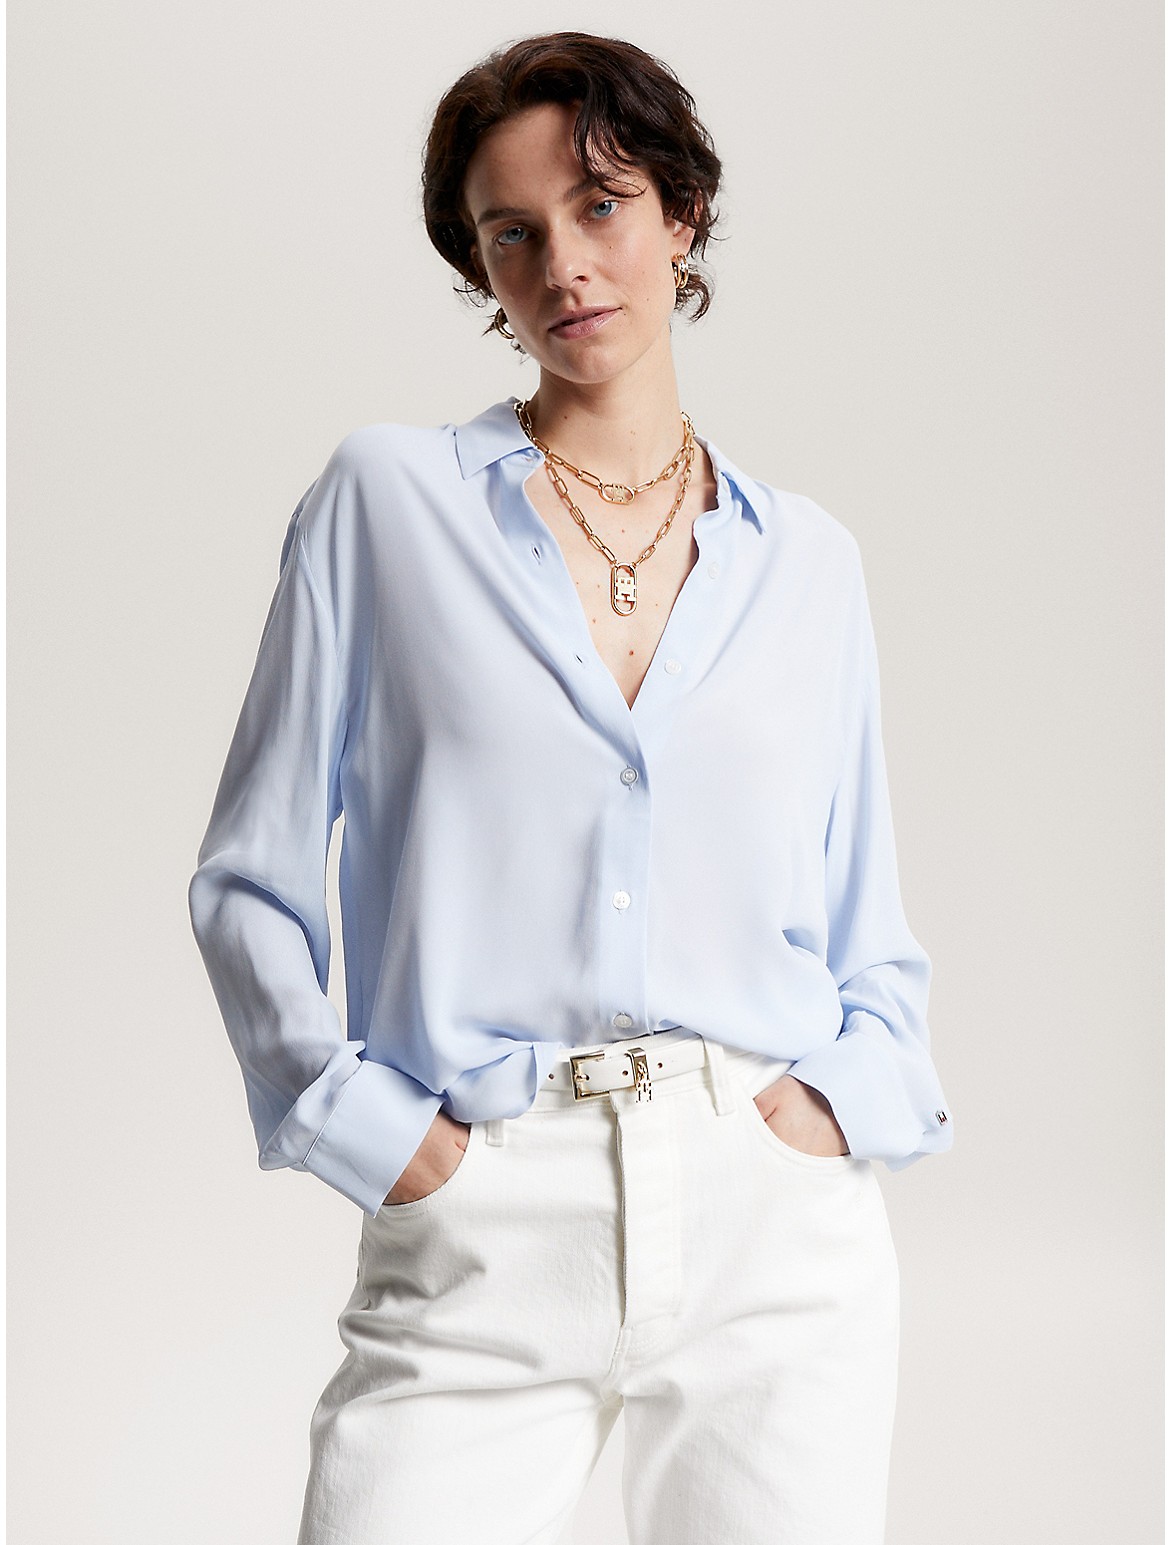 TOMMY HILFIGER Shirts for Women | ModeSens